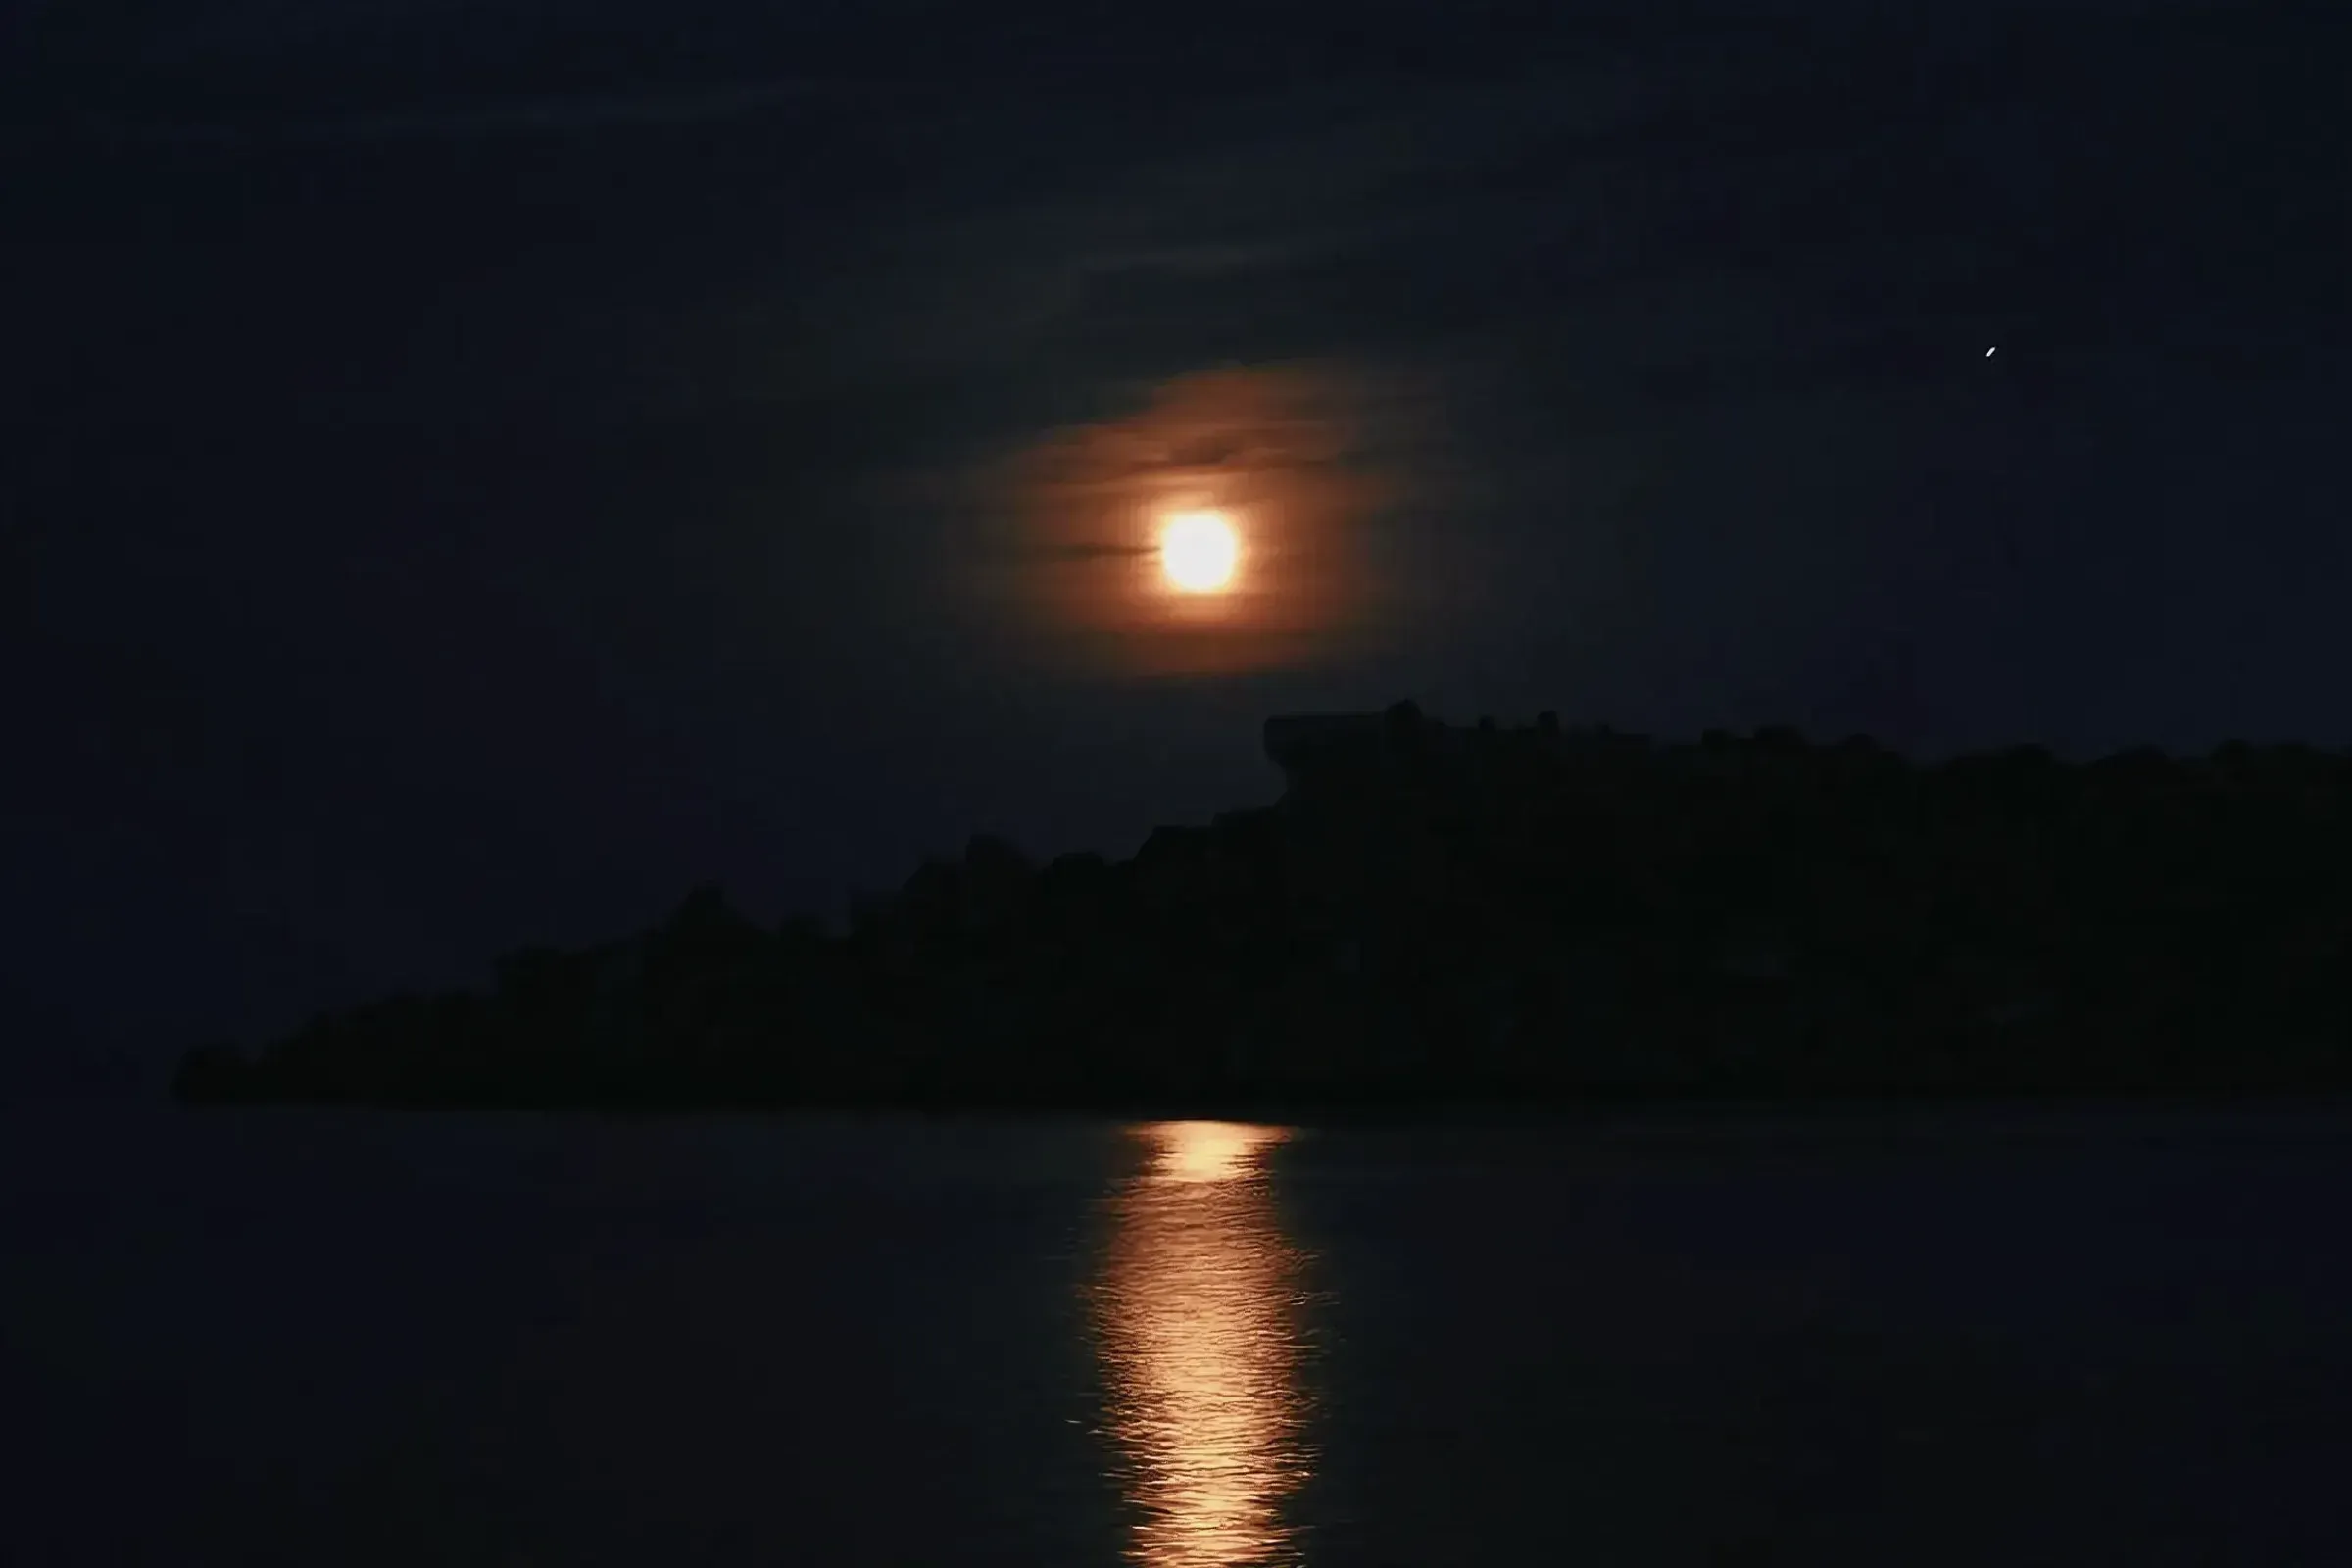 Tranquil nocturnal landscape with full moon reflections on a lake